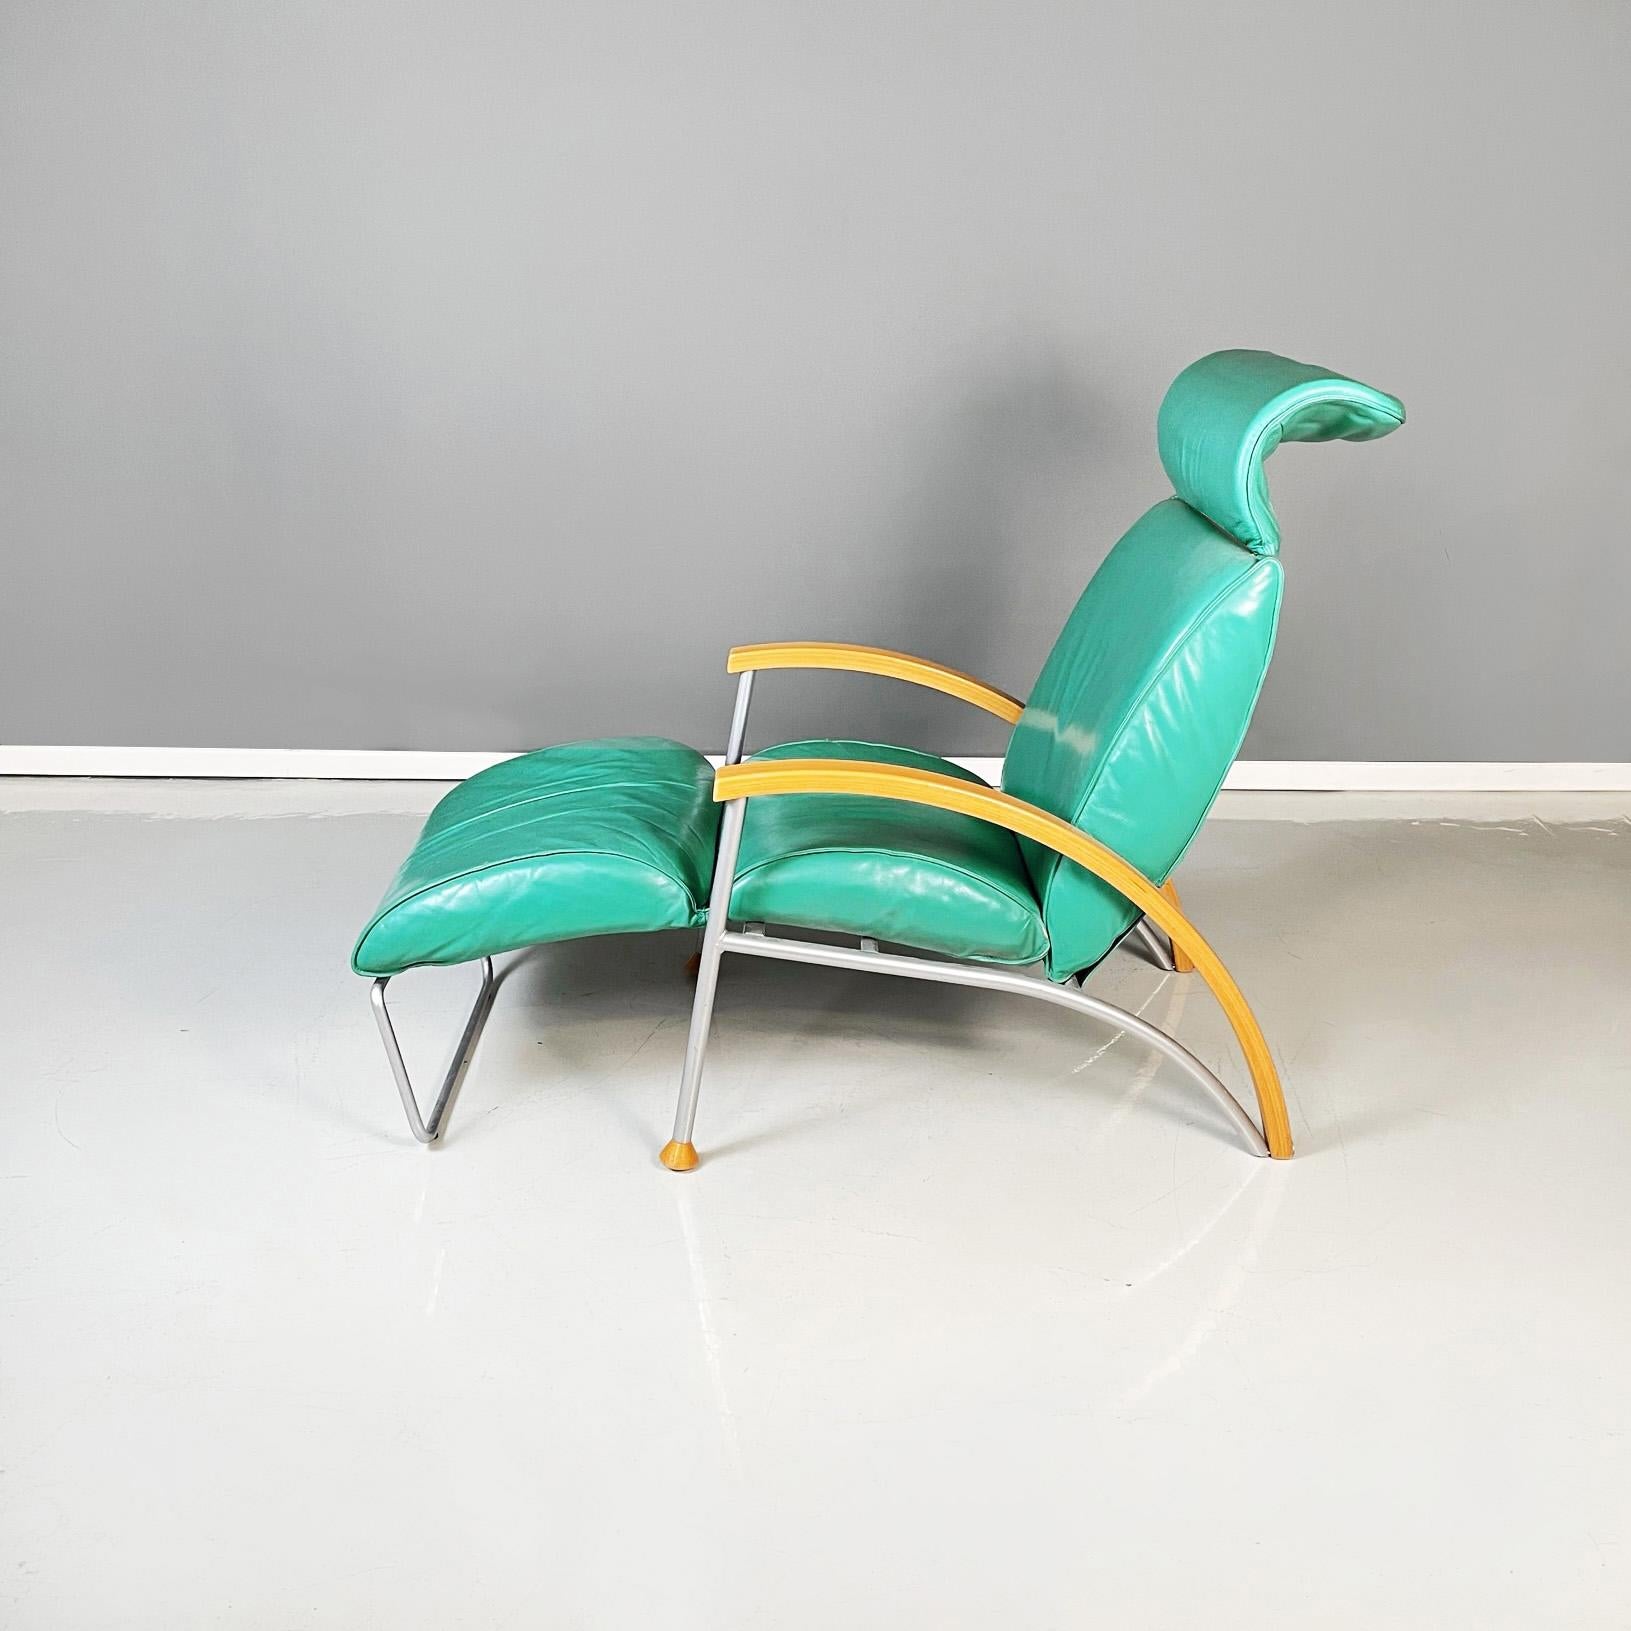 Italian Modern Armchair in Aqua-Green Leather, Wood and Metal, 1980s For Sale 1